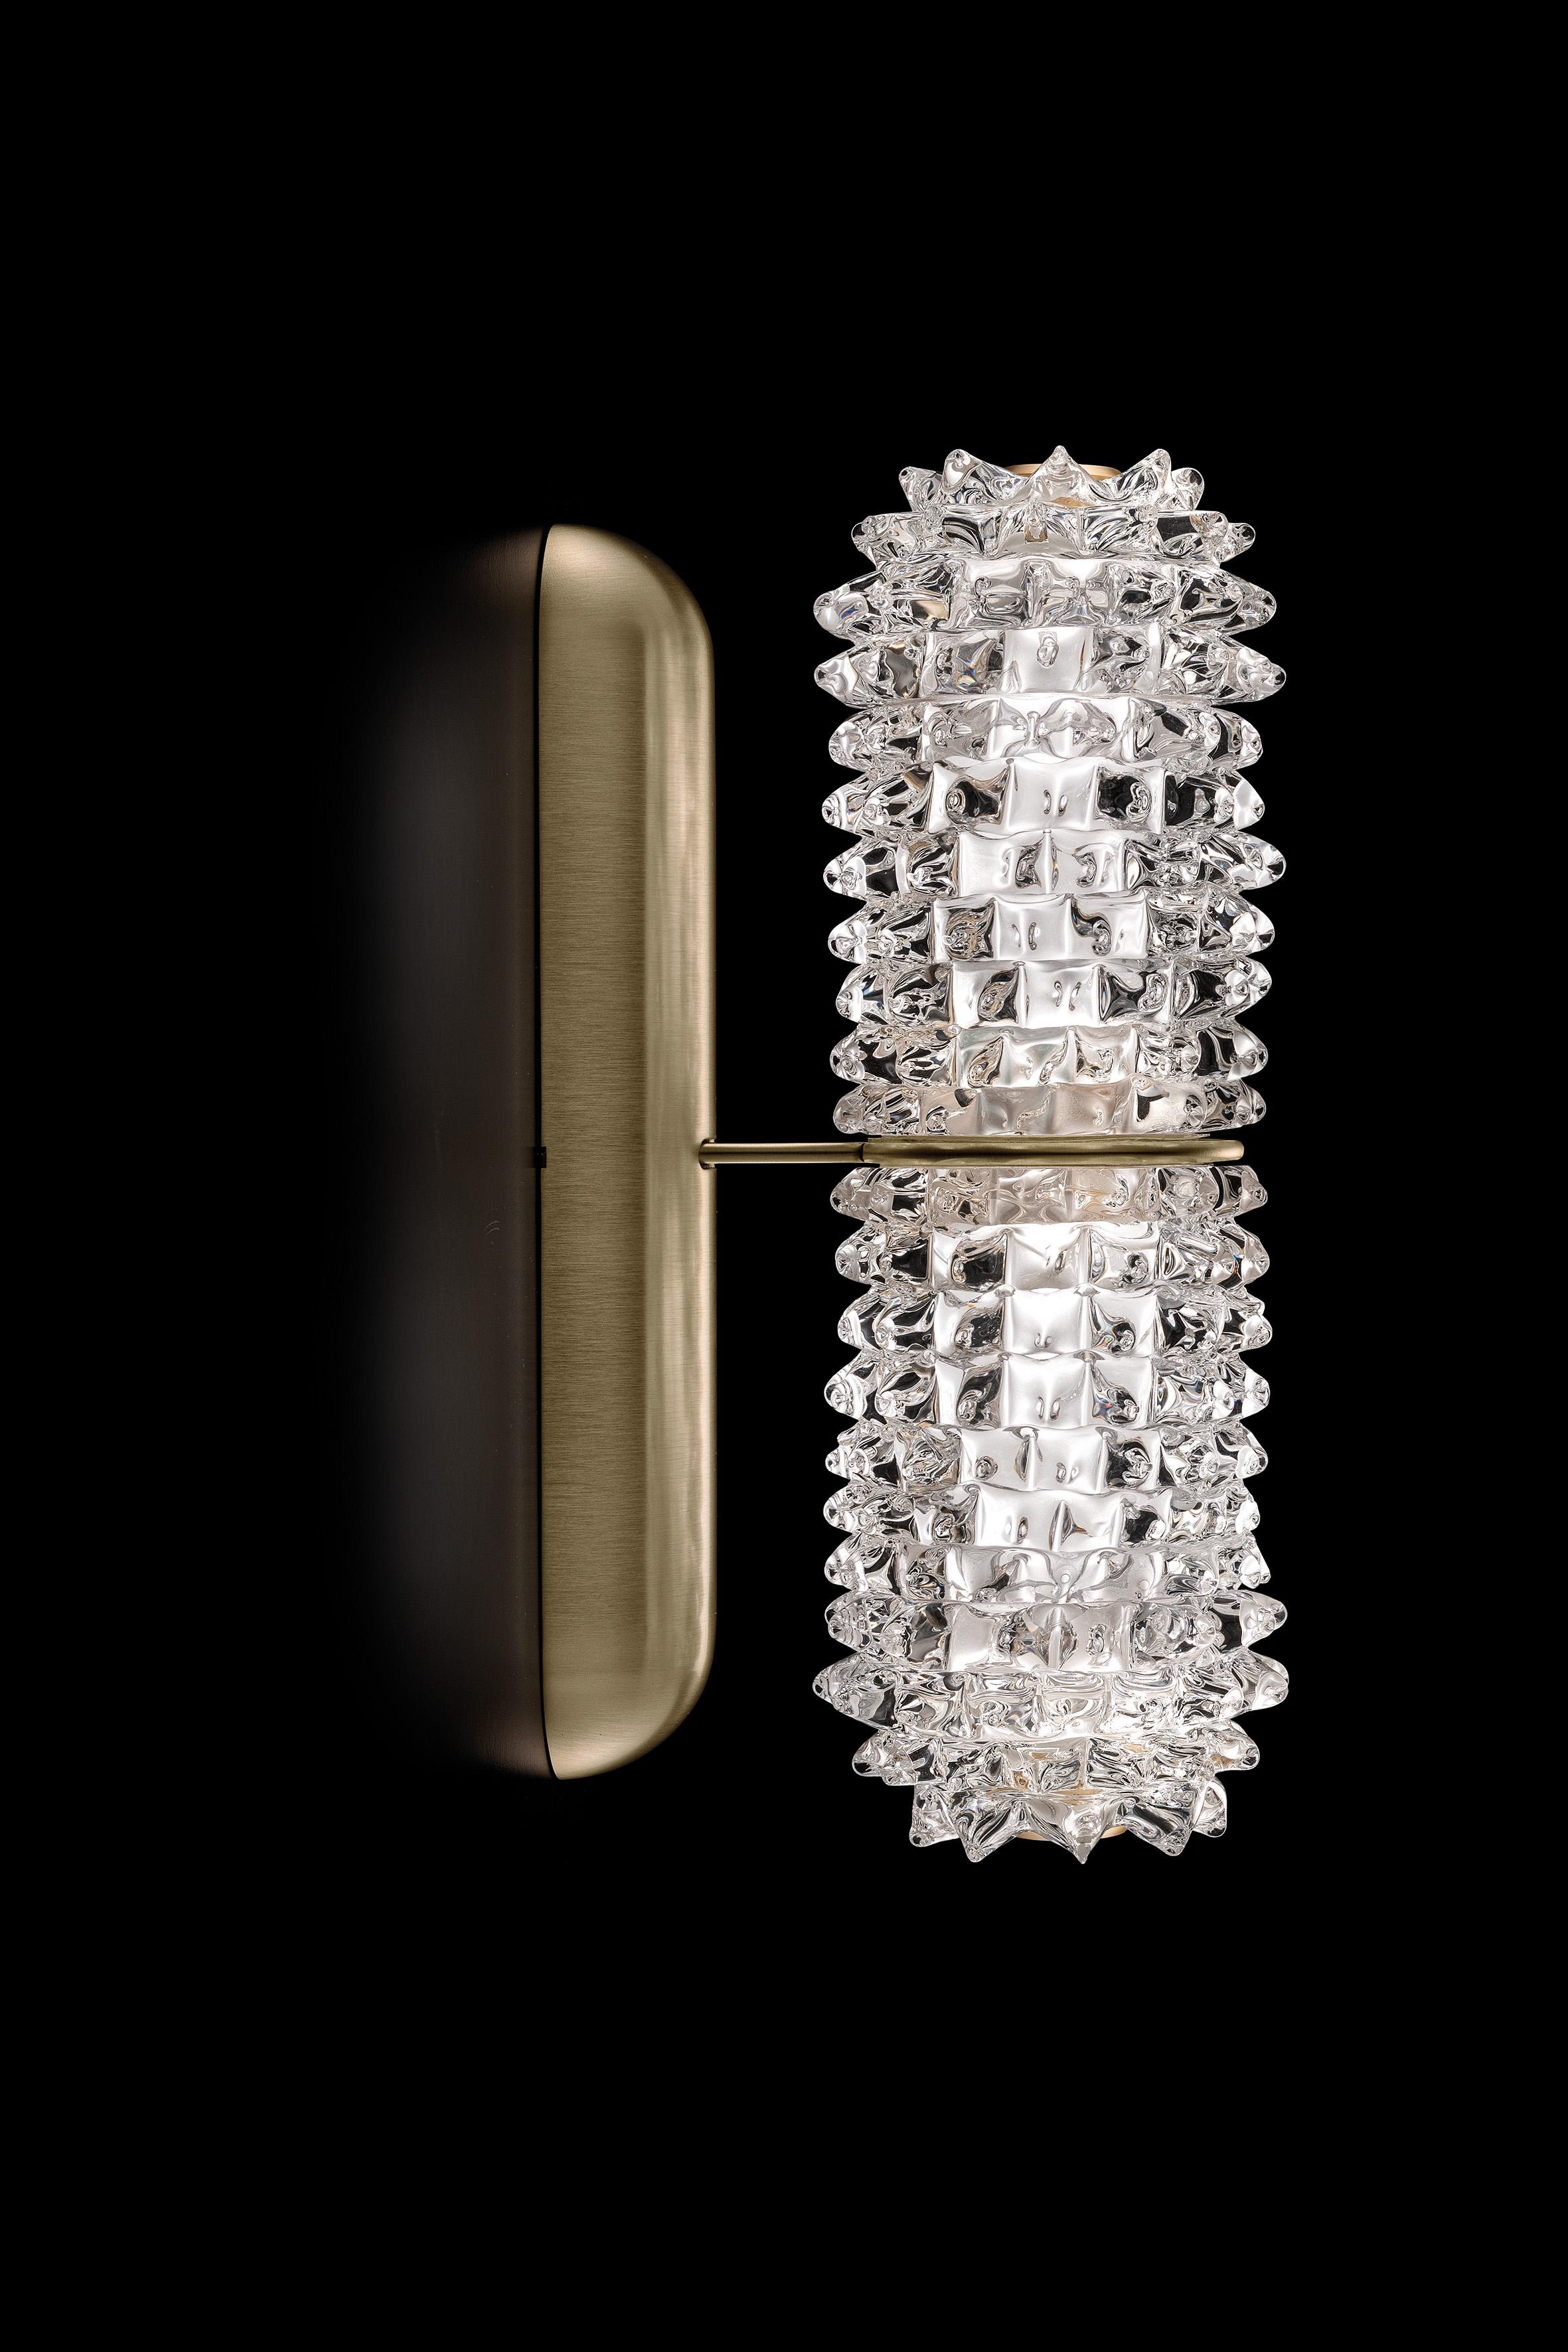 Barovier & Toso Opera 7389 Wall Sconce in Crystal with Black Nickel Finish 4